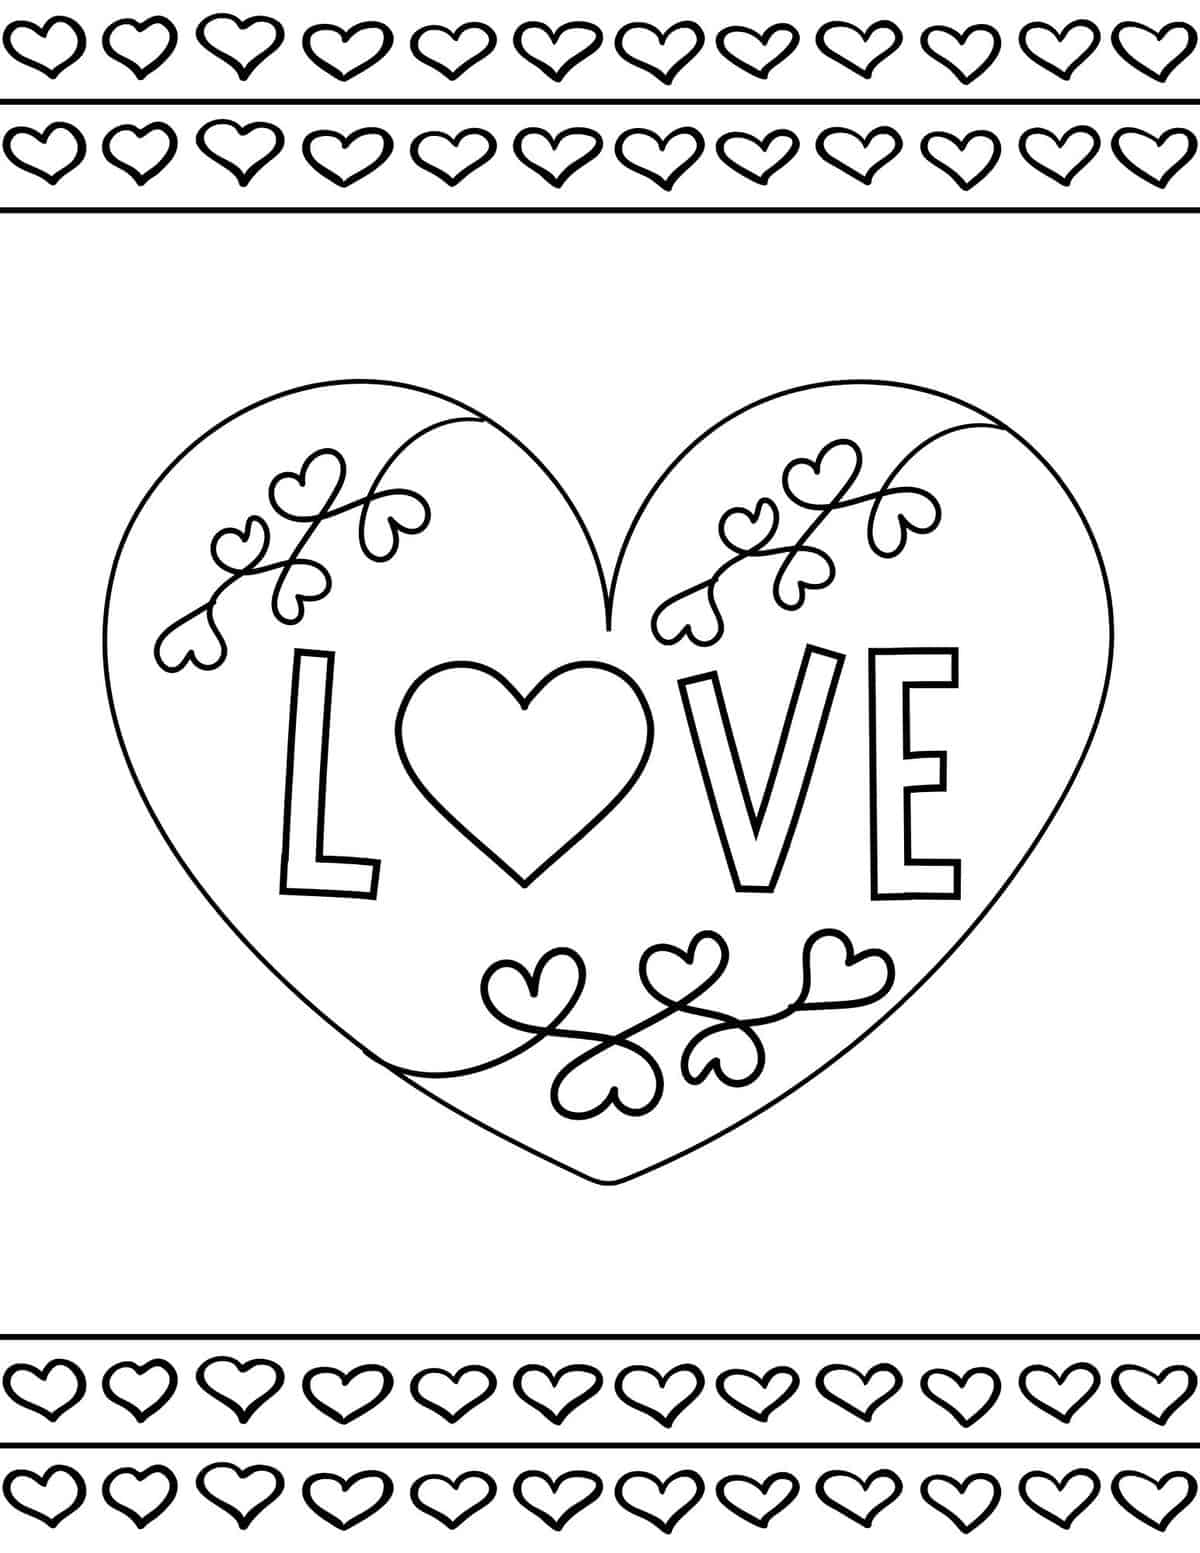 Valentine's Day coloring page with hearts border